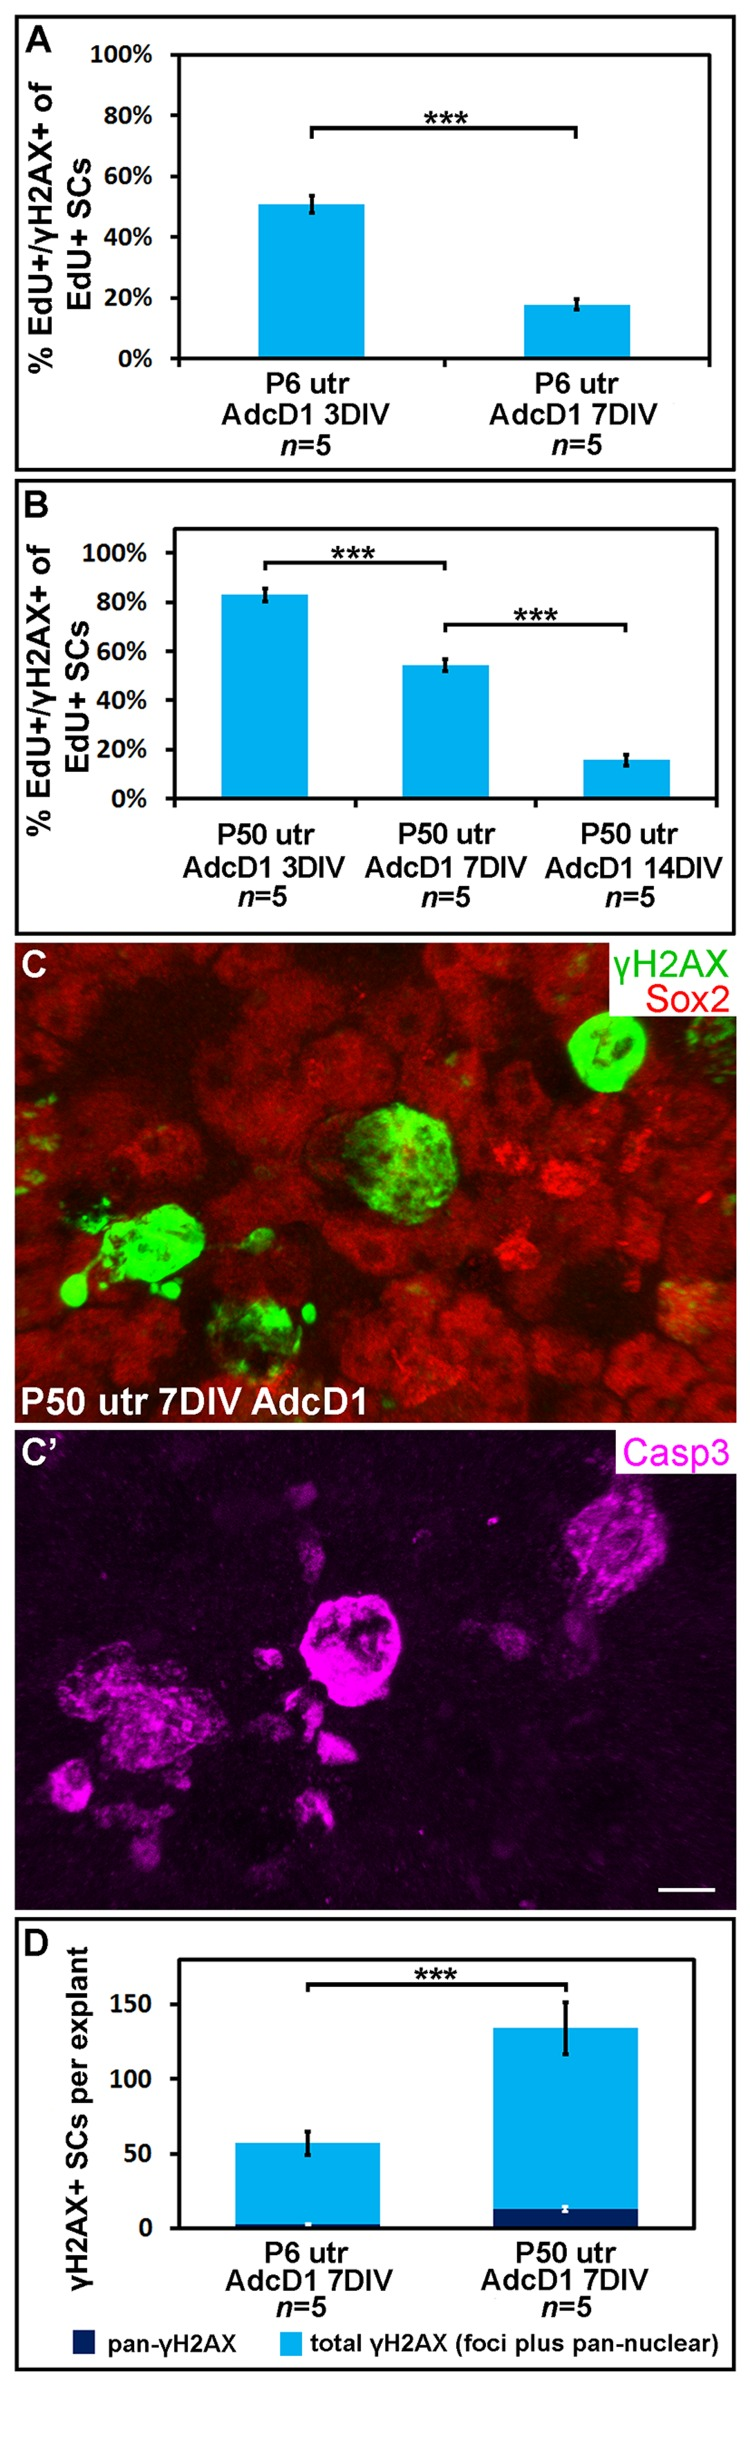 Utricular supporting cells show age-dependent resolution of γH2AX foci following cell cycle re-entry. AdcD1-infected P6 and P50 utricular explants were analyzed at 3, 7 and 14 DIV. (A) Quantification shows a prominent decrease in the amount of EdU+ SCs with γH2AX foci in P6 utricles from 3 to 7 DIV. (B) Quantification shows a prominent decrease in the amount of EdU+ SCs with γH2AX foci in P50 utricles not before 14 DIV. (C,C') At 7 DIV, AdcD1-infected P50 utricles show SCs with intense, pan-nuclear γH2AX staining. These cells co-express cleaved caspase-3. (D) At 7 DIV, quantification shows a highly significant difference between AdcD1-infected juvenile and adult utricles in the proportion of γH2AX+ SCs with intense, pan-nuclear expression out of the total population of γH2AX+ SCs. Mean ± SEM and the number of explants (n) are shown. Statistical significance: ***, p 